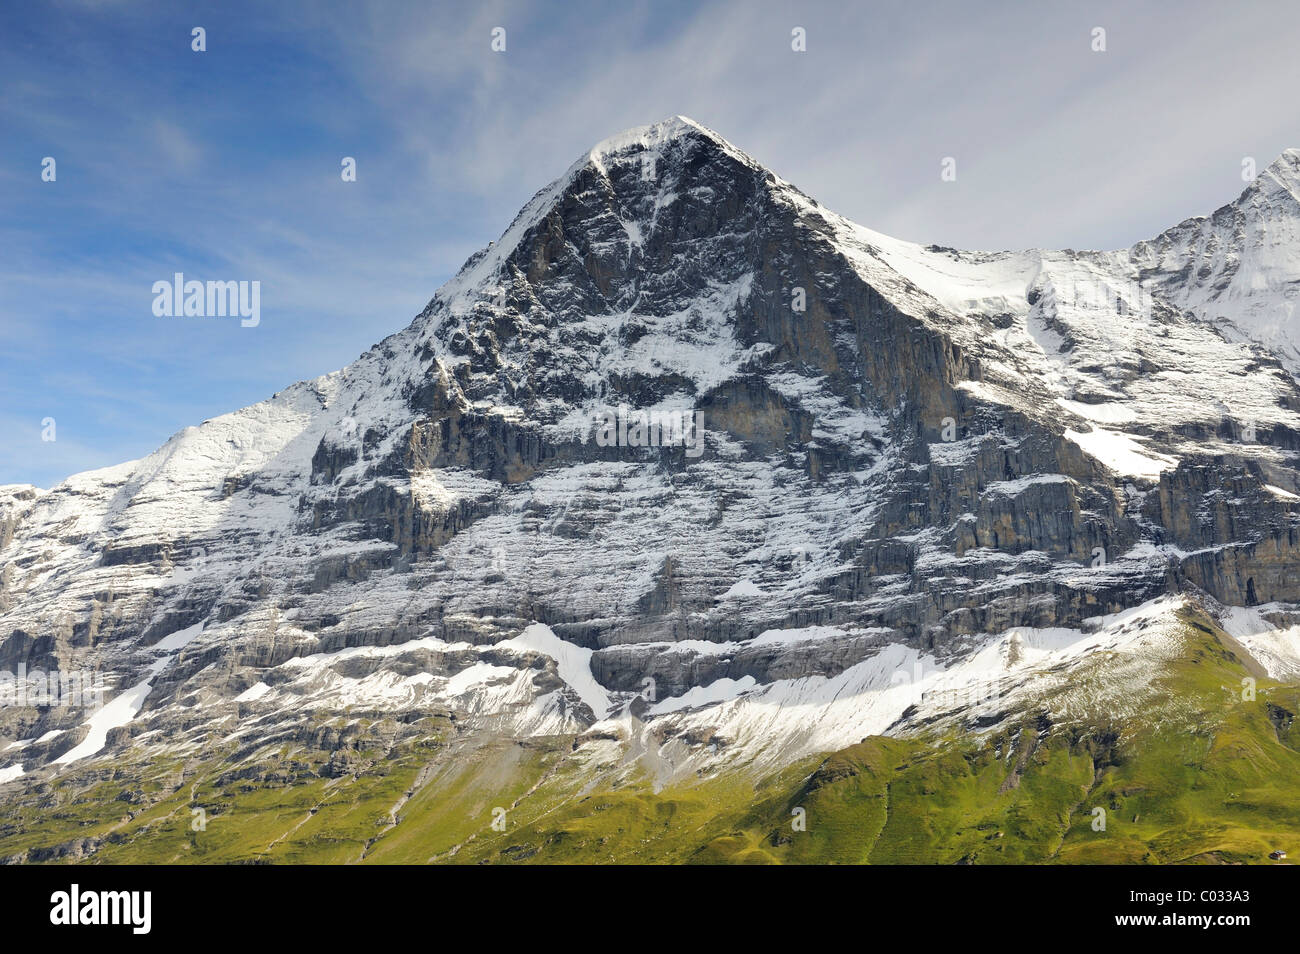 North face of the 3970 metre high Eiger Mountain seen from the south, Canton of Bern, Switzerland, Europe Stock Photo